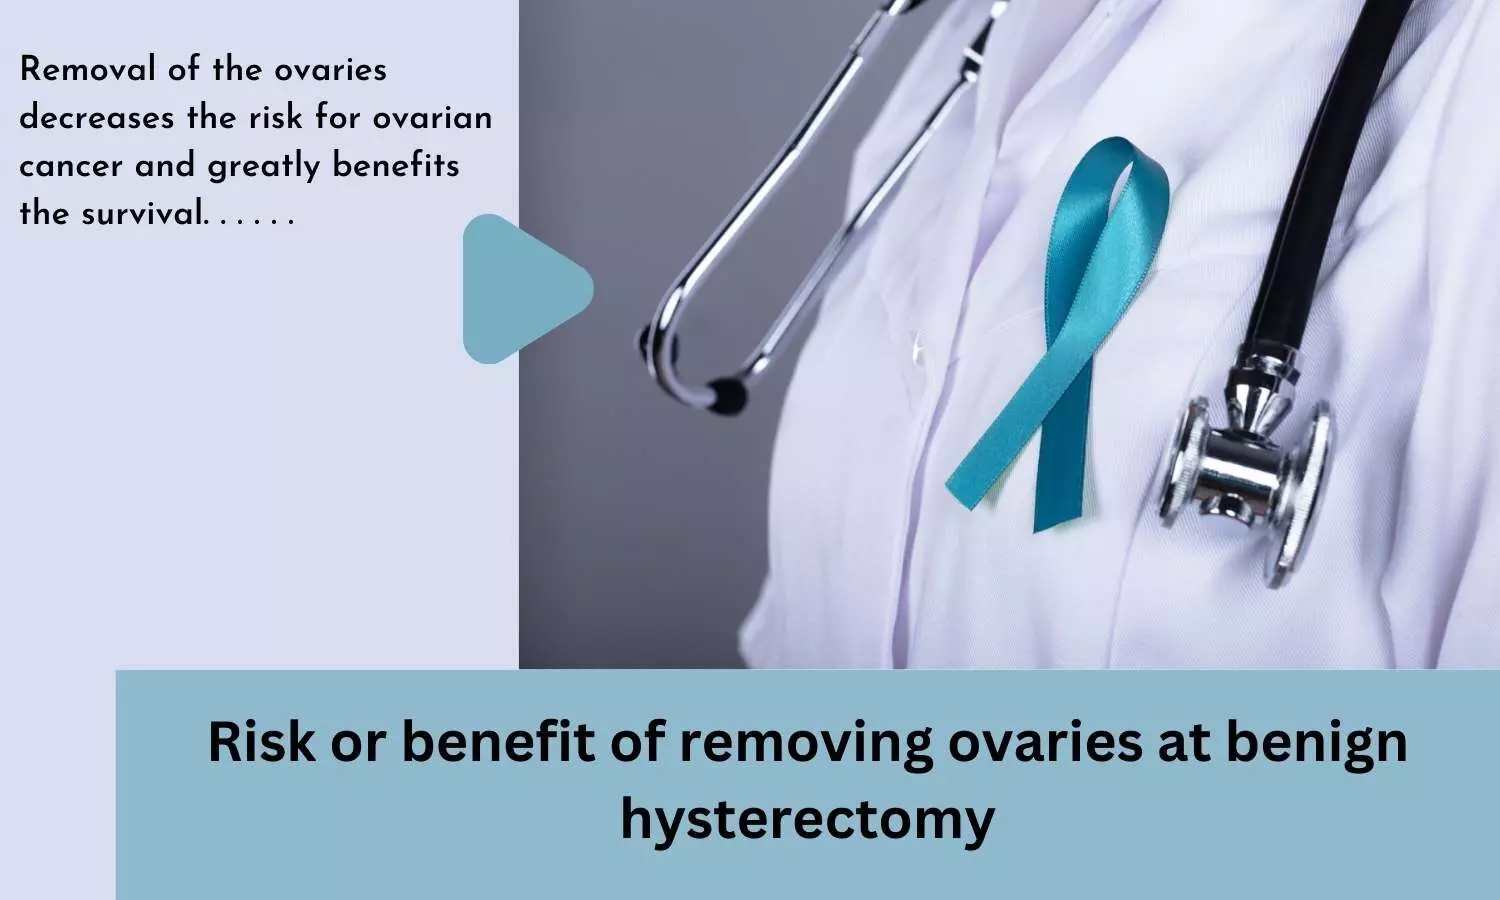 Risk or benefit of removing ovaries at benign hysterectomy